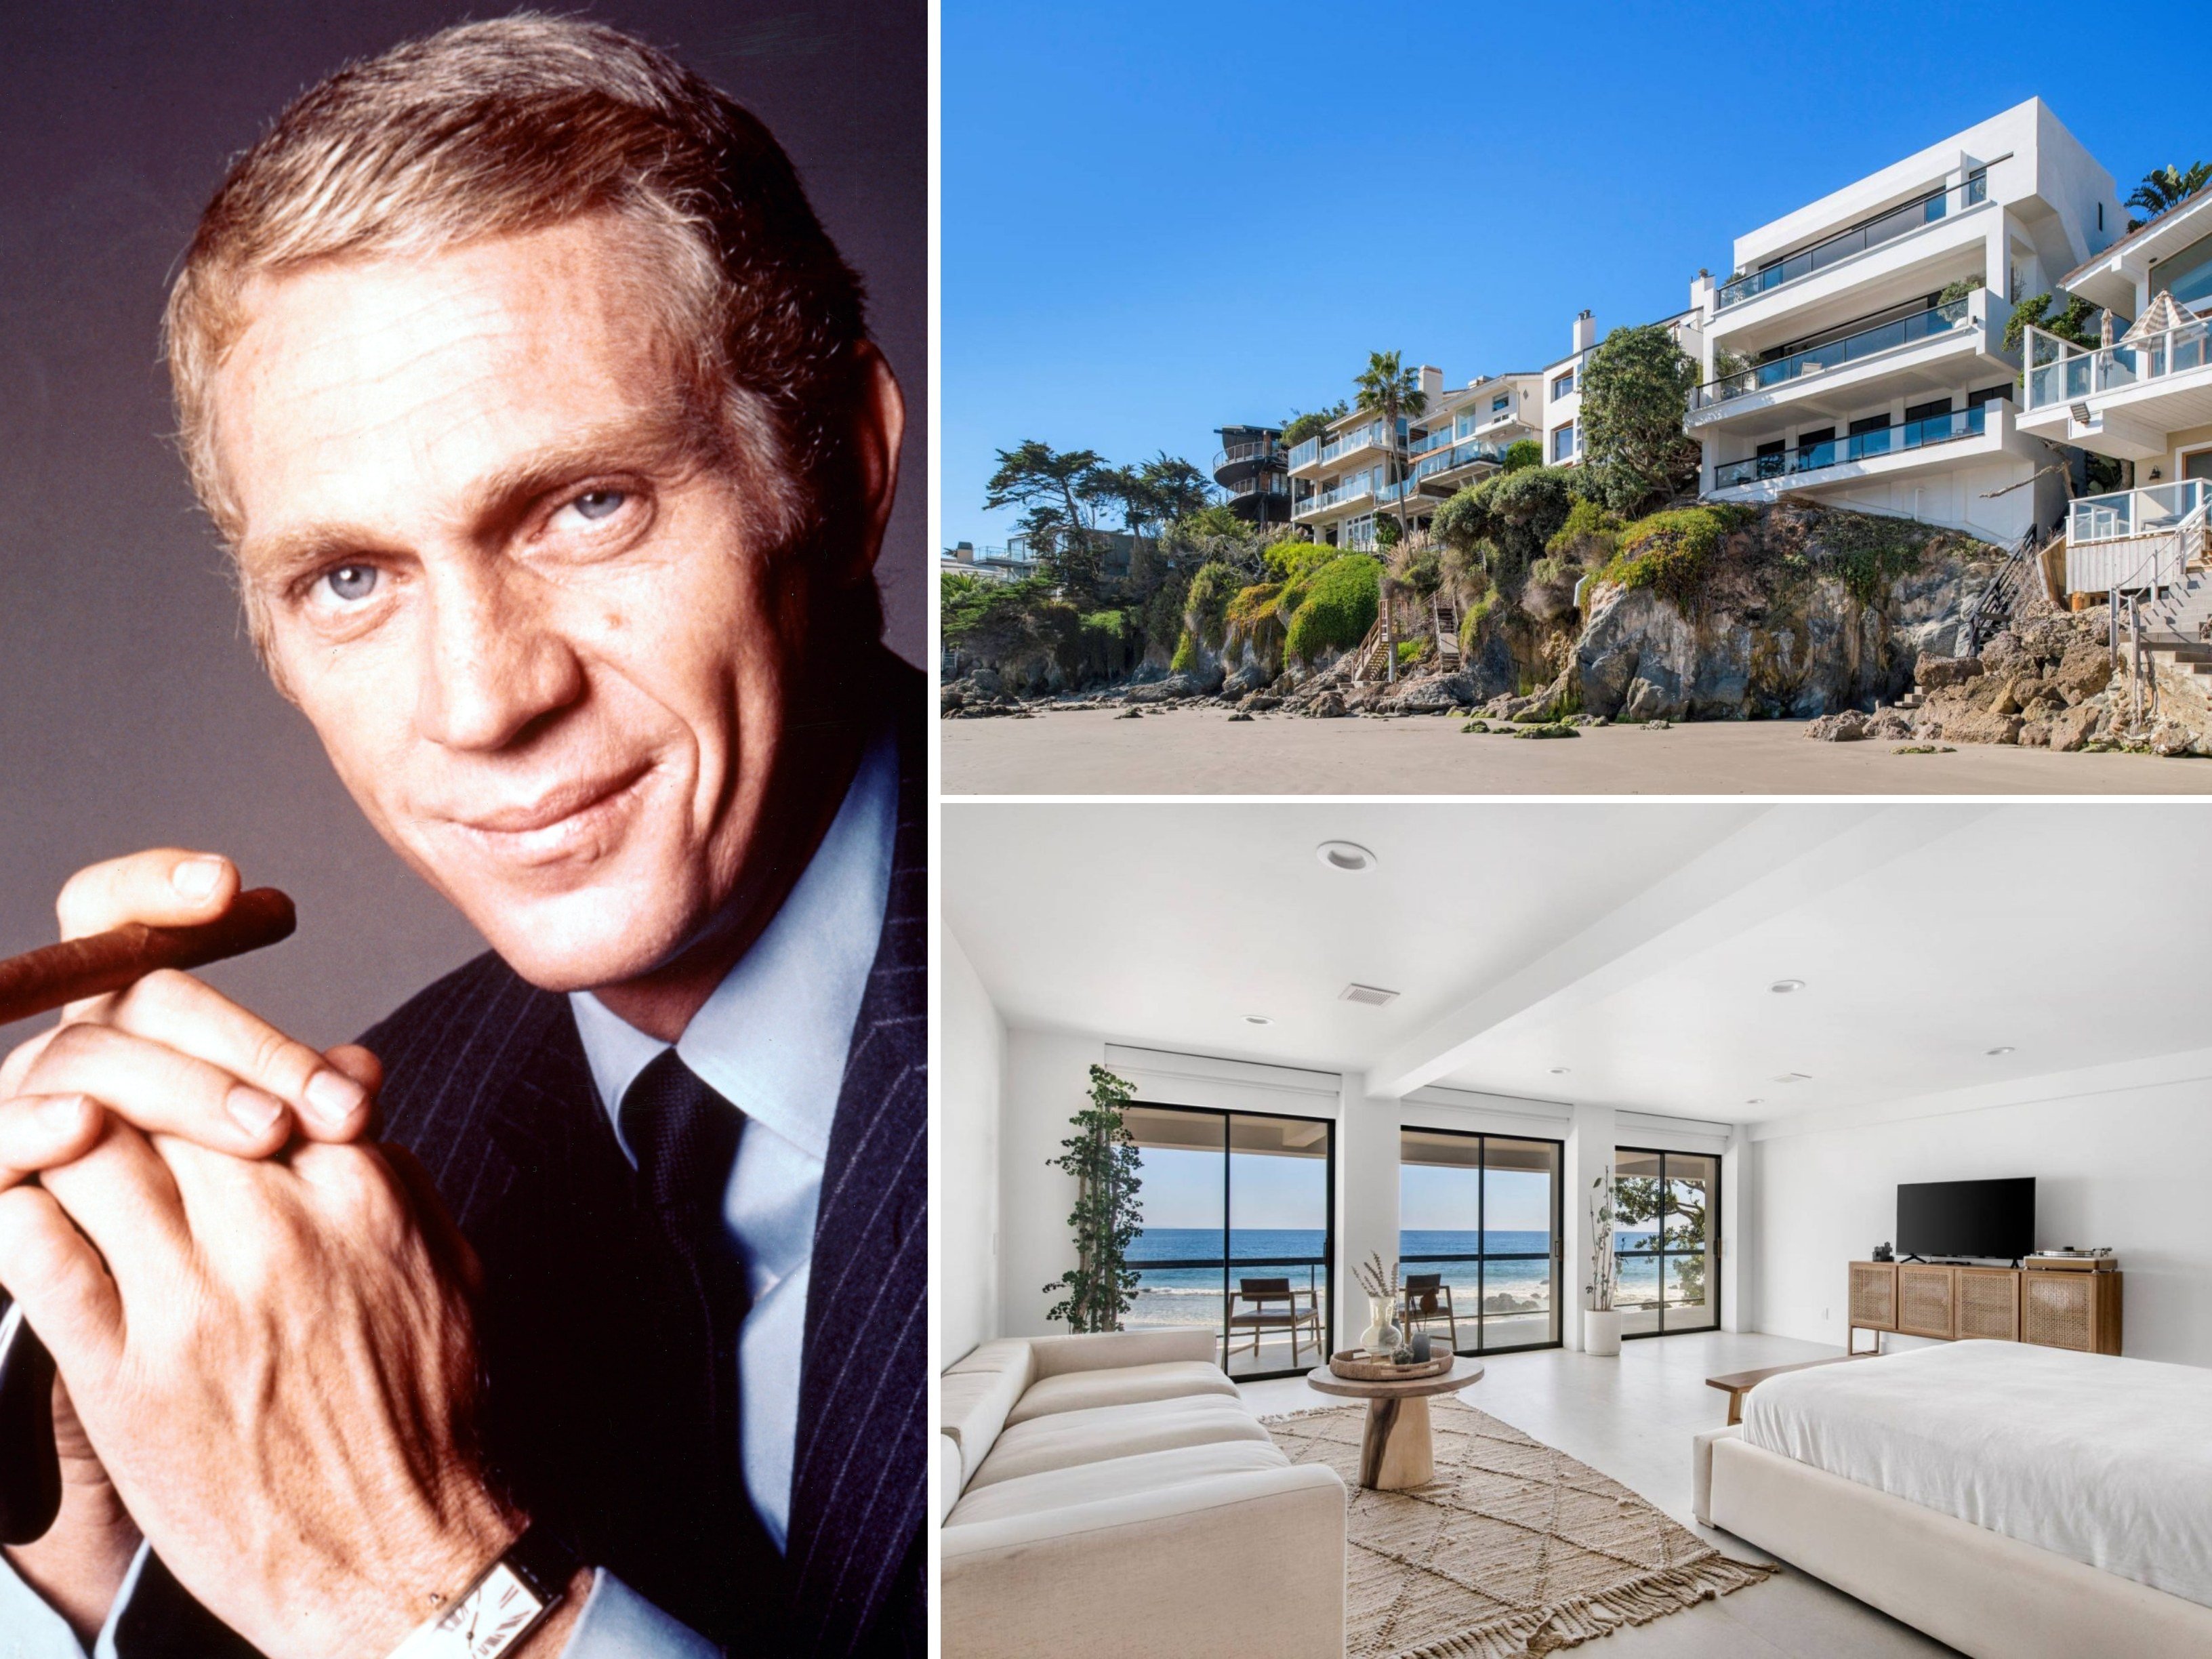 Hollywood legend Steve McQueen originally invested in his beachside Malibu home for some privacy. Photos: Getty Images, Coldwell Banker